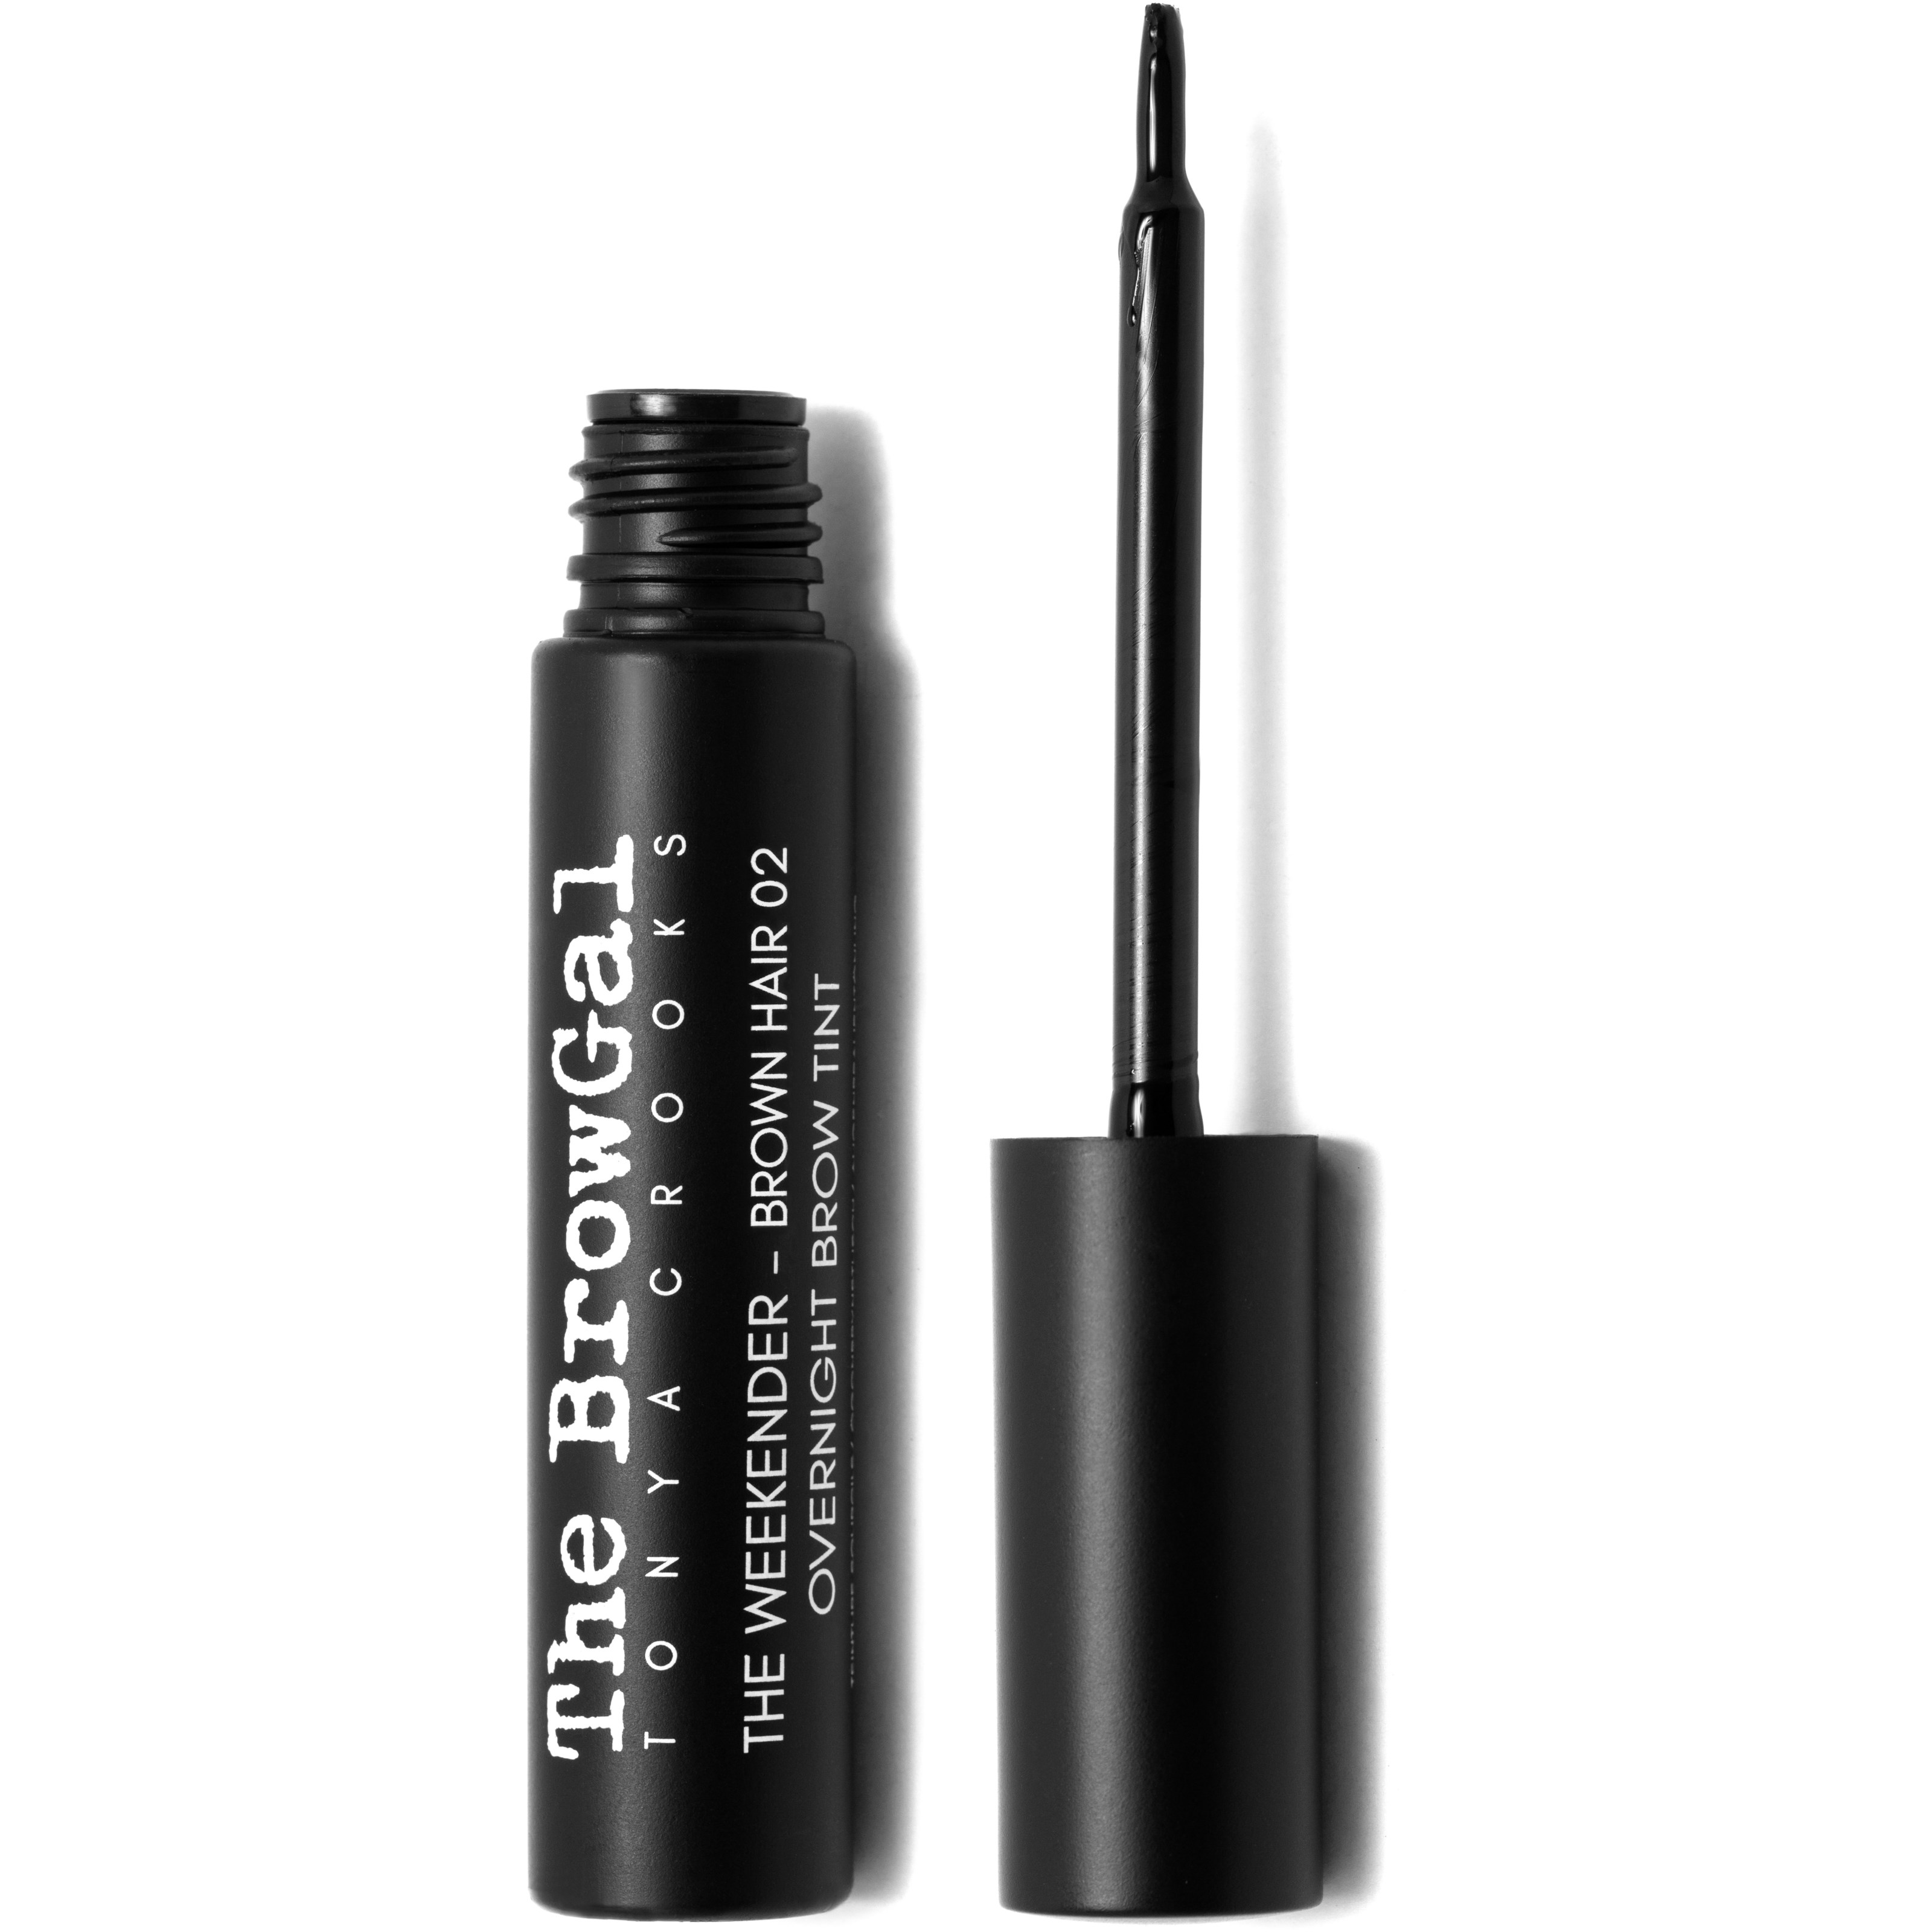 The BrowGal The Weekender Overnight Brow Tint 02 Brown Hair